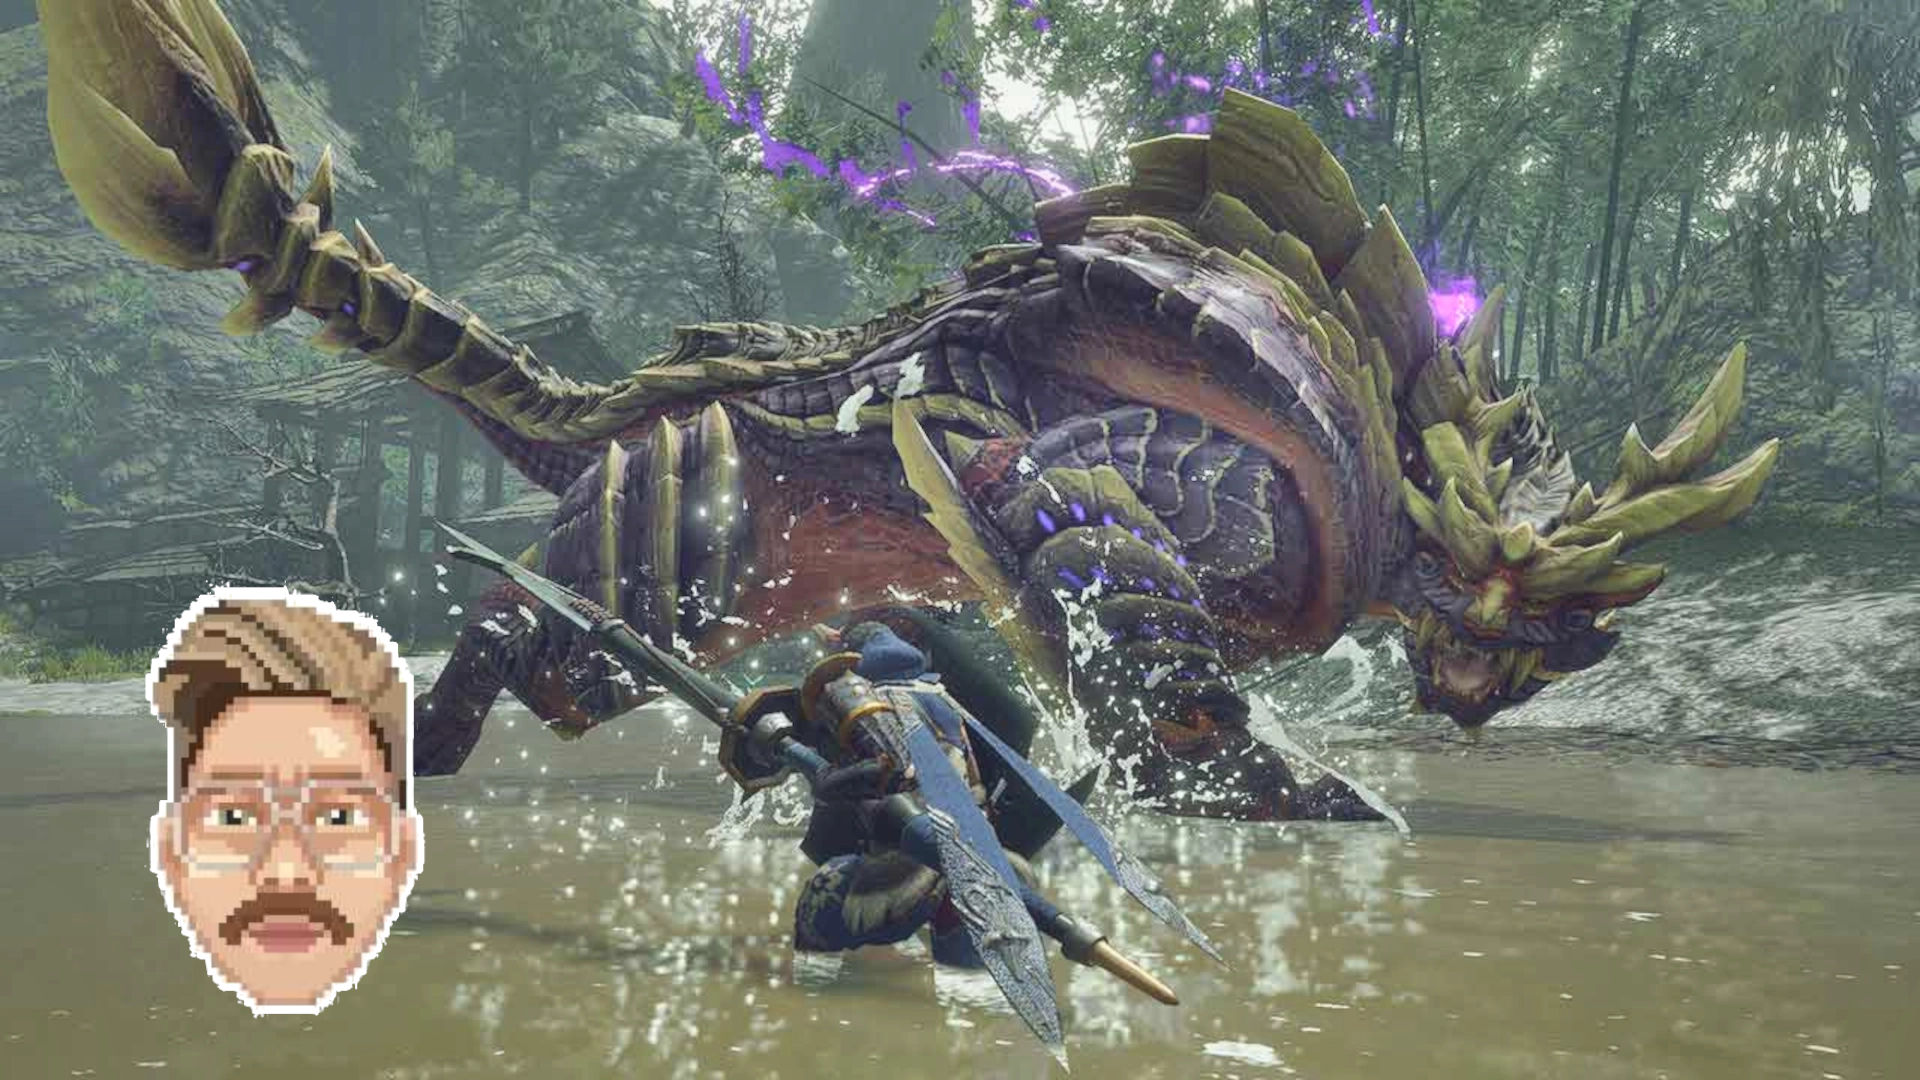 Nathan's pick for GOTY, Monster Hunter Rise, showing a hunter fighting a monster